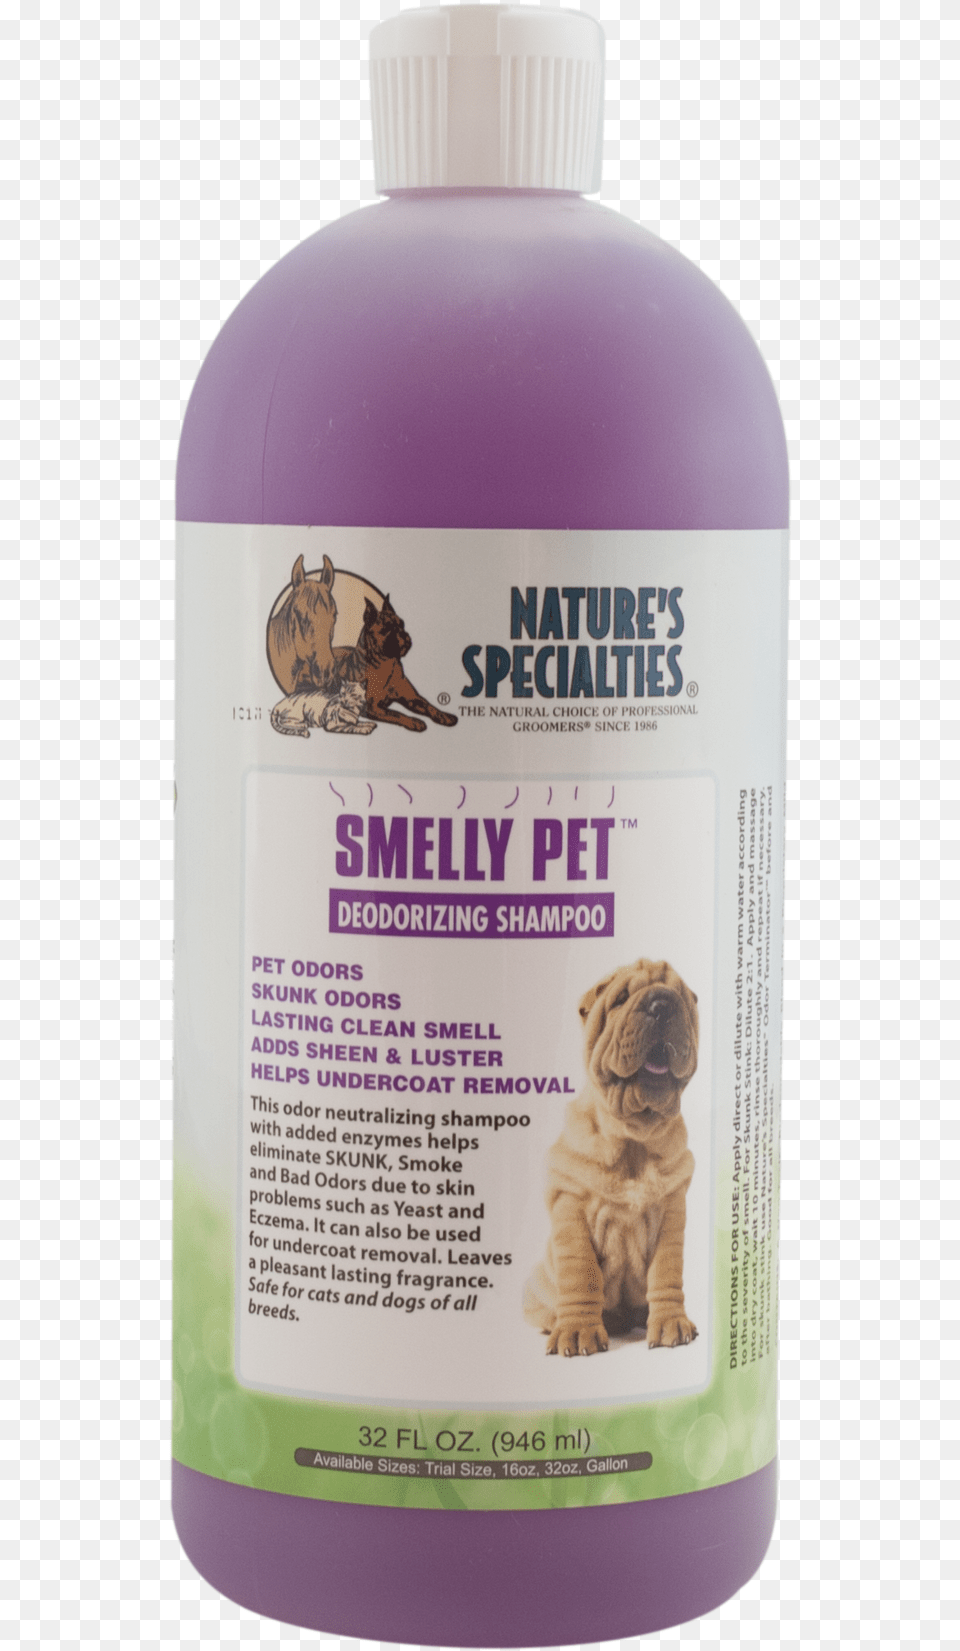 Smelly Pet Shampoo For Dogs Amp Catsdata Zoom Cdn Cosmetics, Herbs, Plant, Herbal, Bottle Png